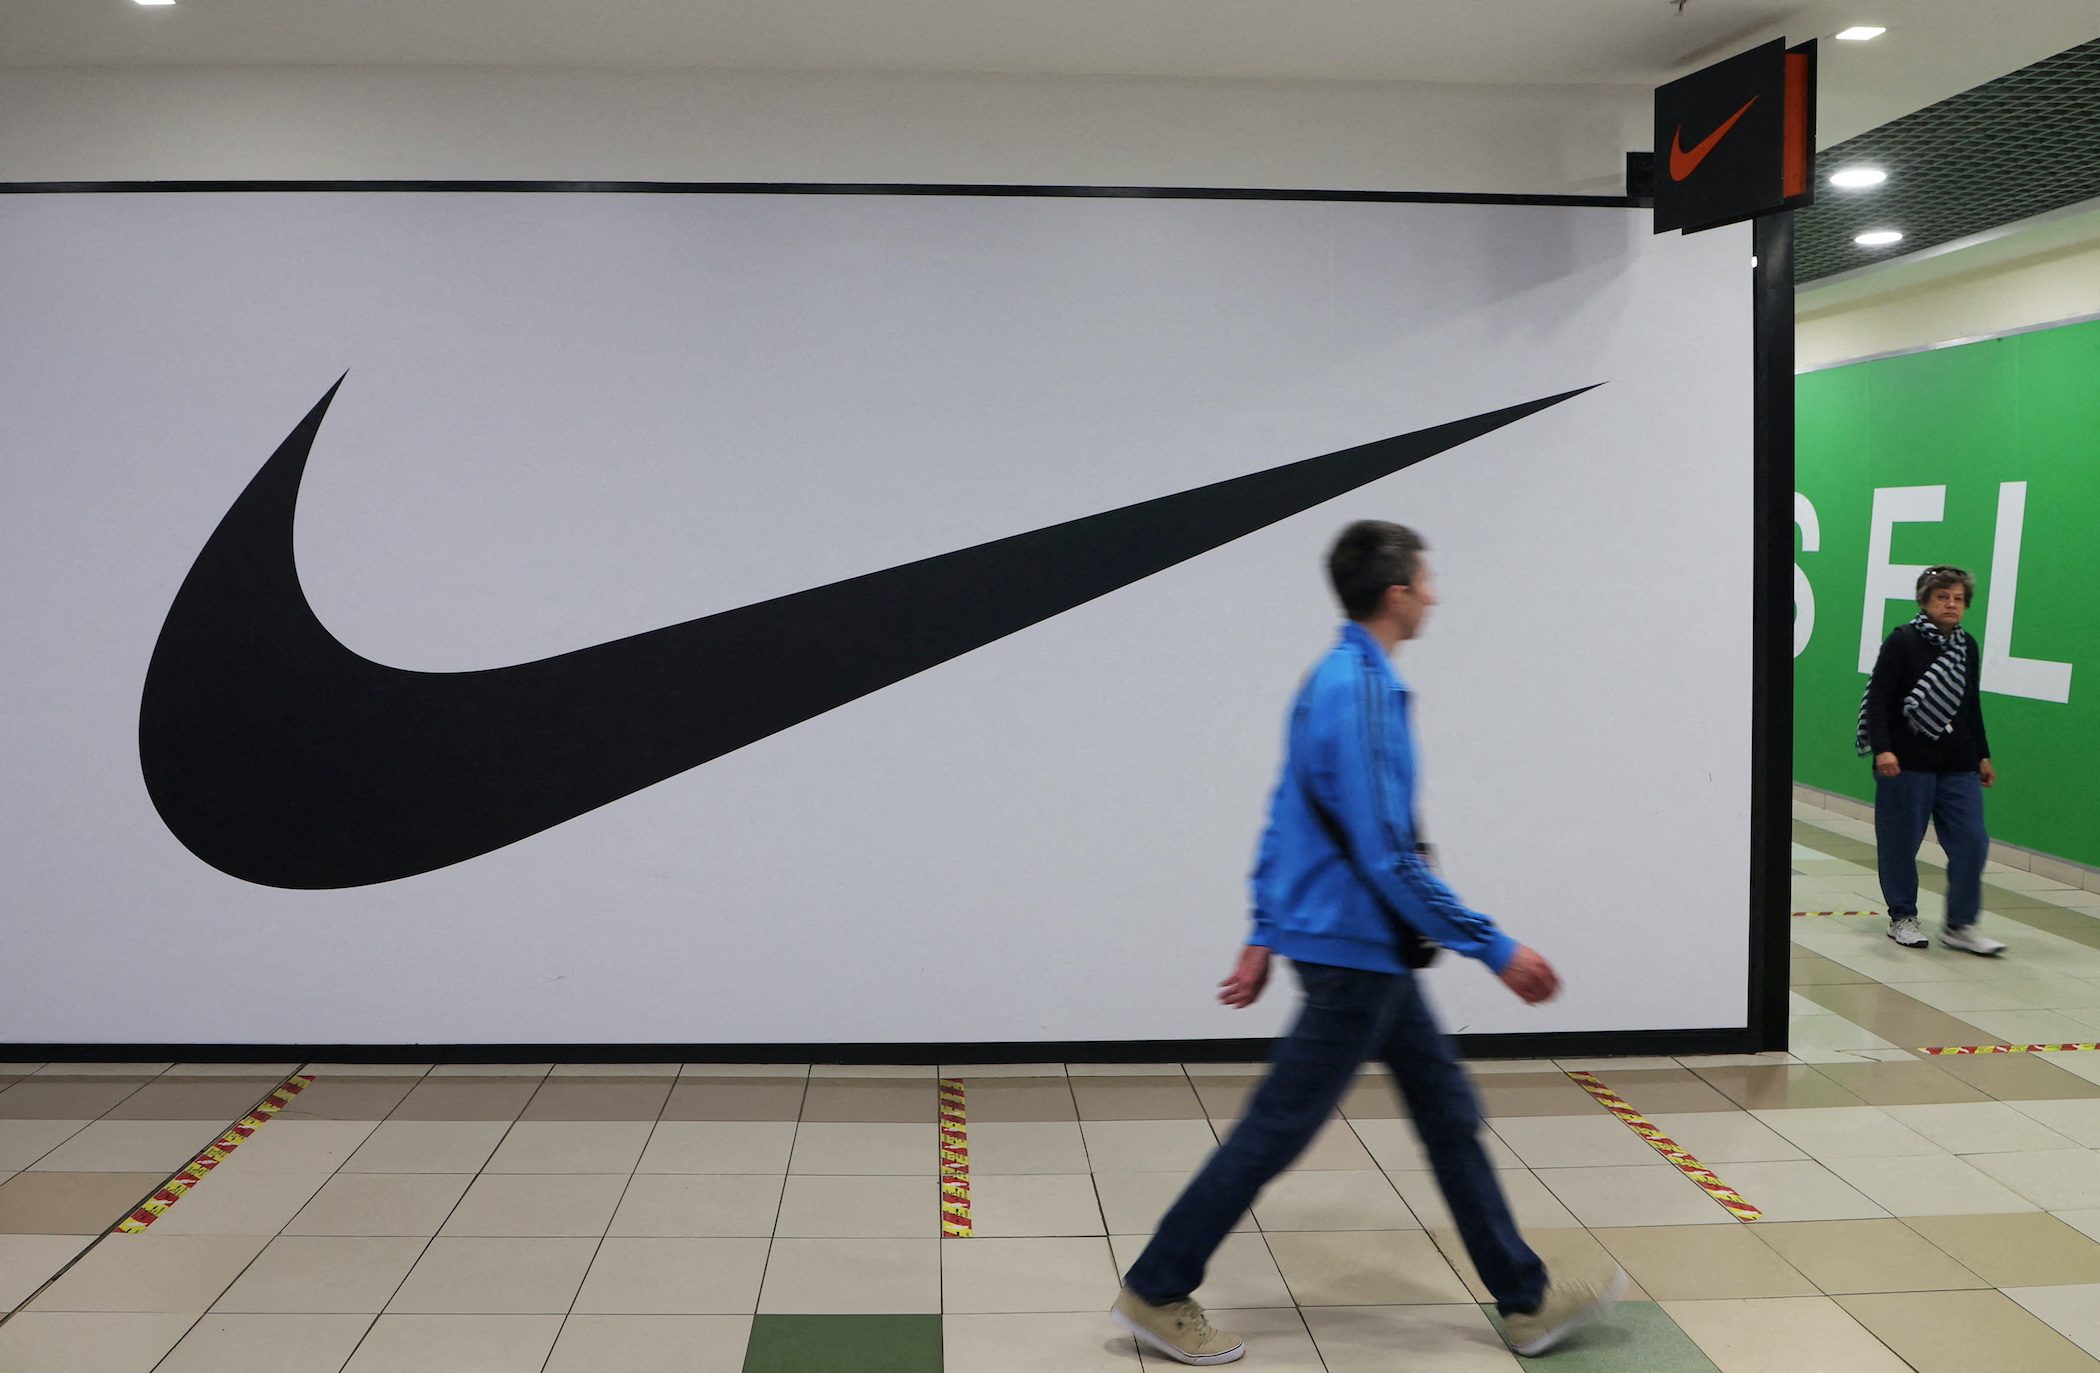 Nike to fully exit Russia, will scale down in coming months